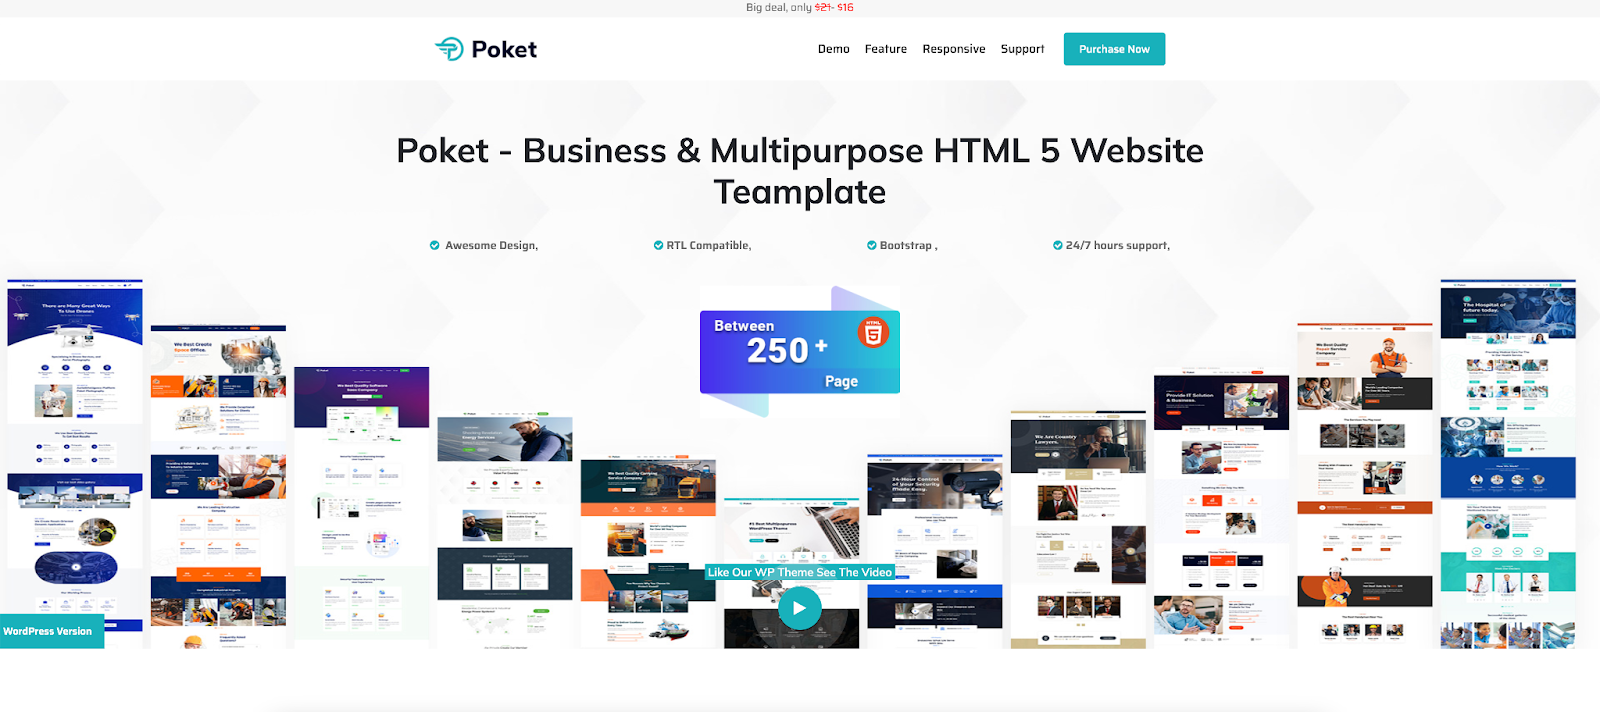 Poket is a website and blog template looks good on any device, large or small